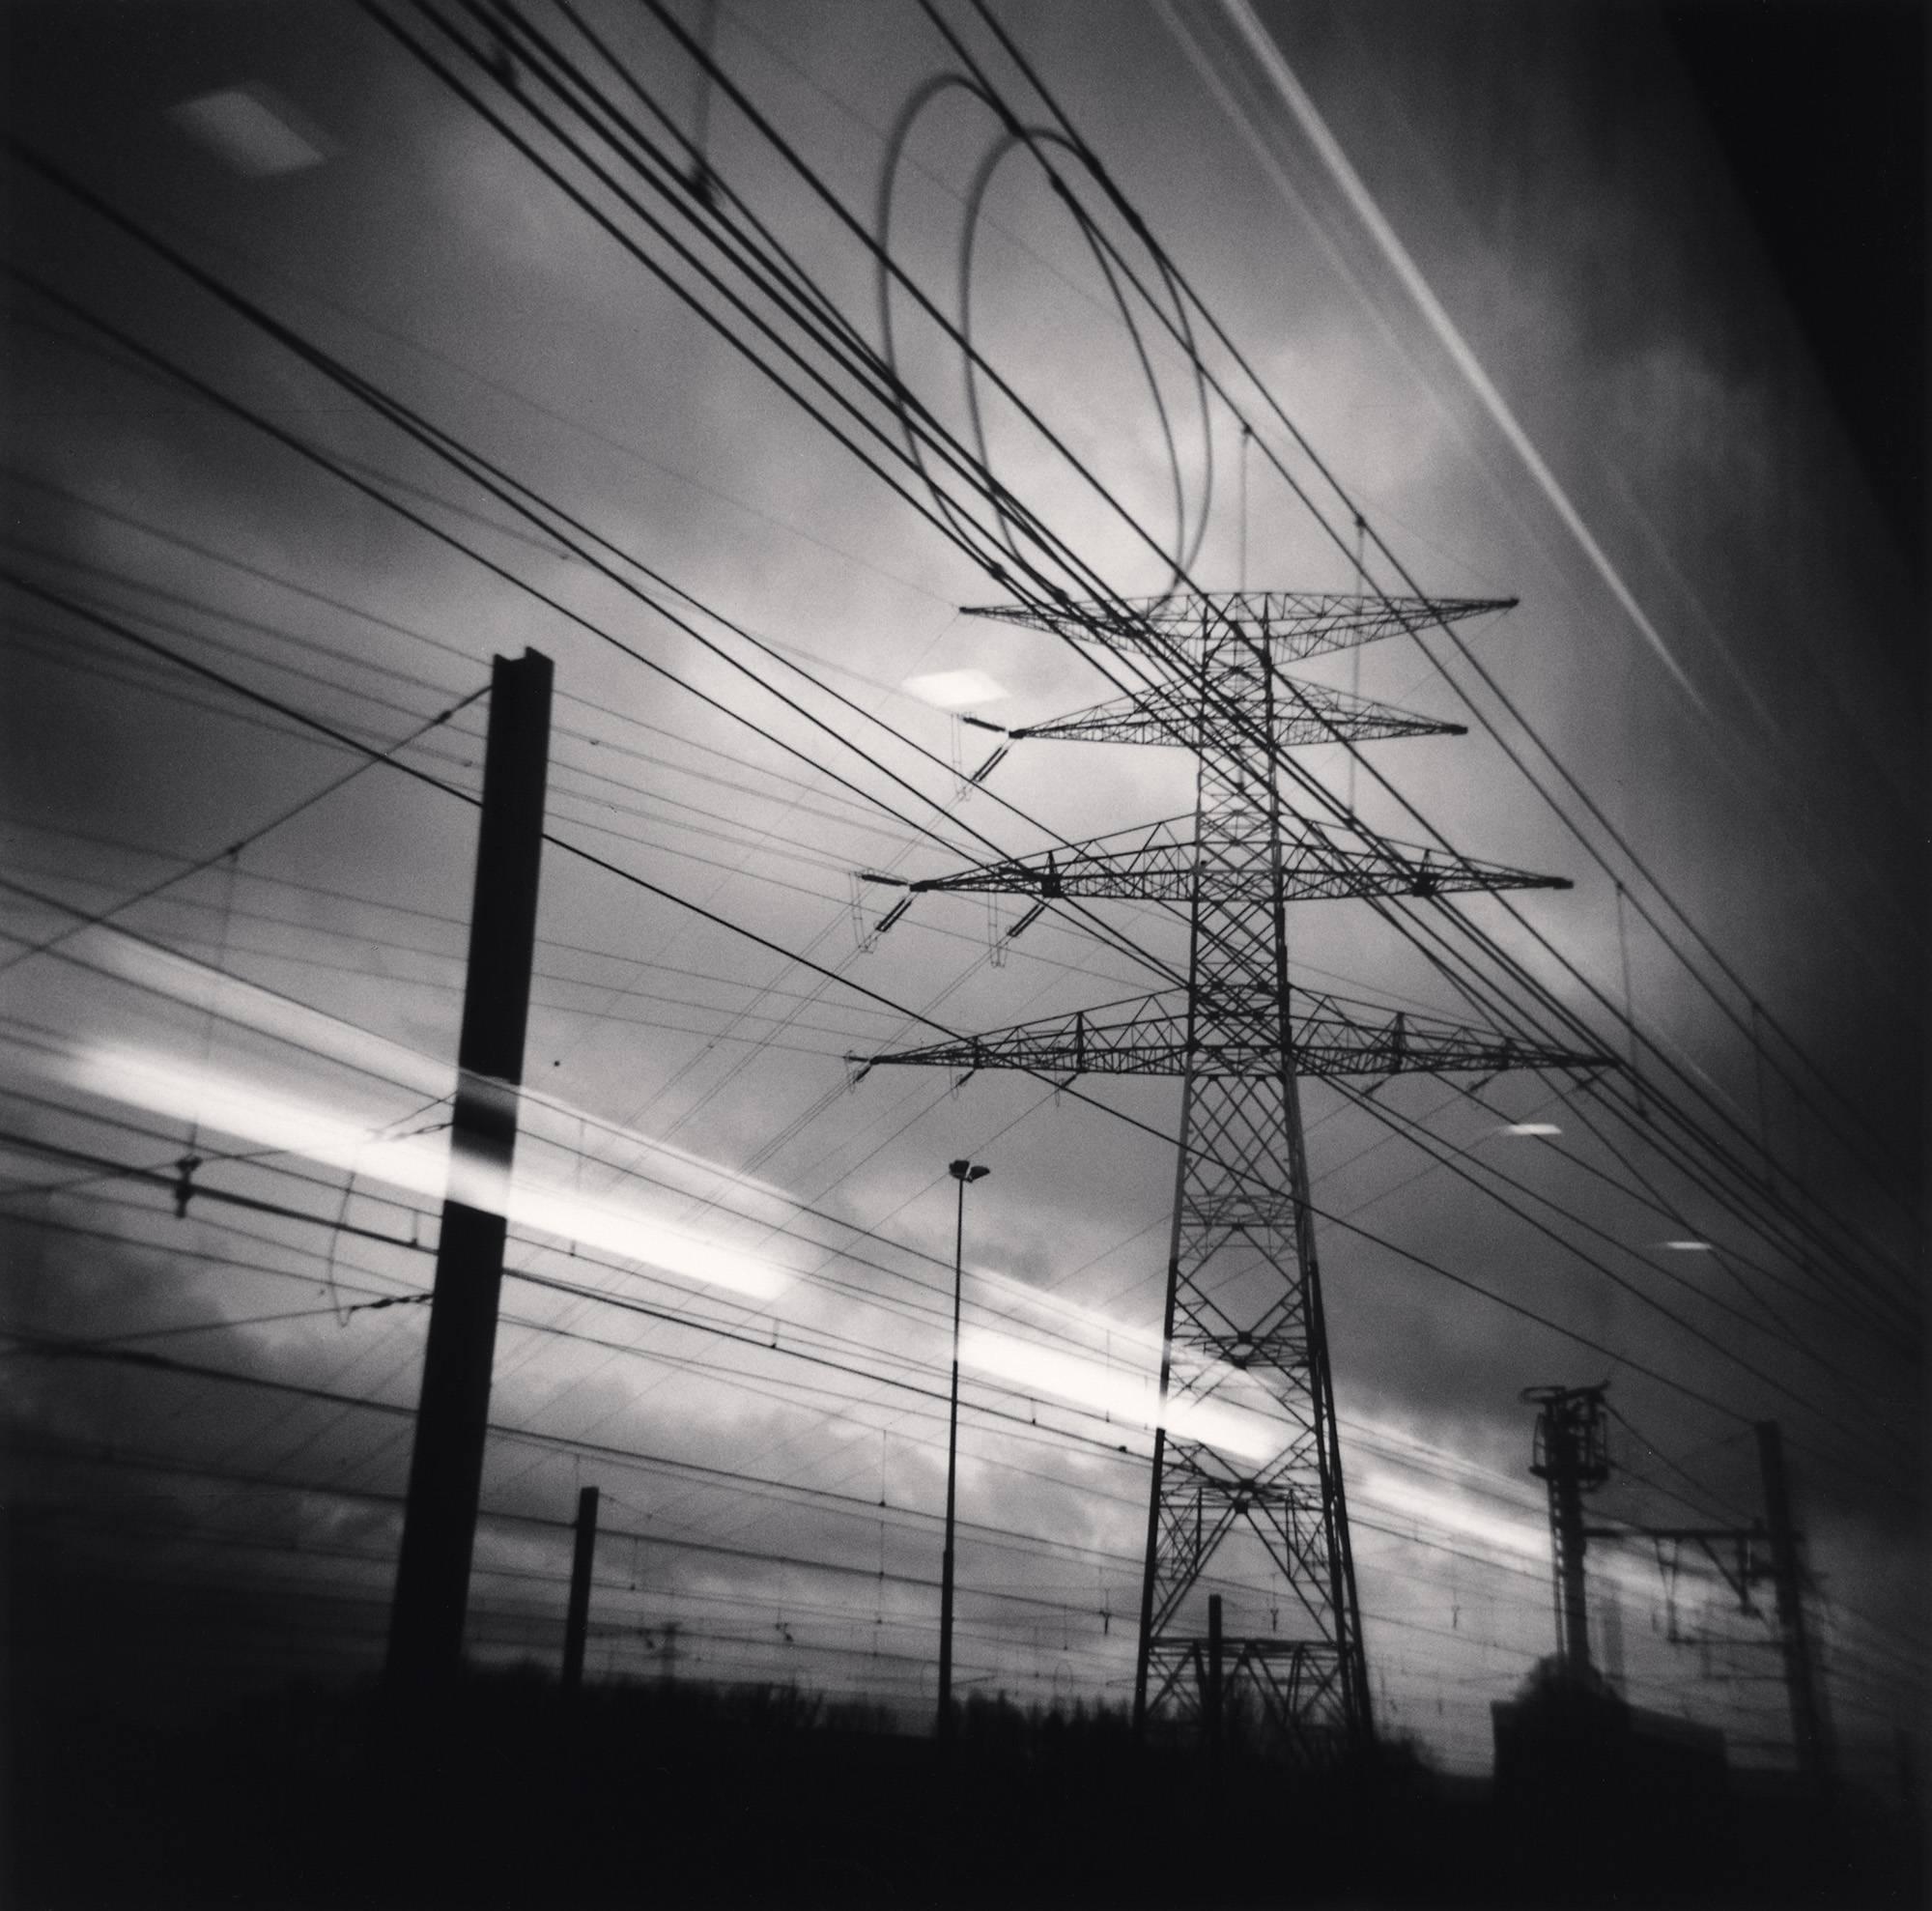 Michael Kenna Black and White Photograph - Thalys View, Brussels, Belgium. 2010